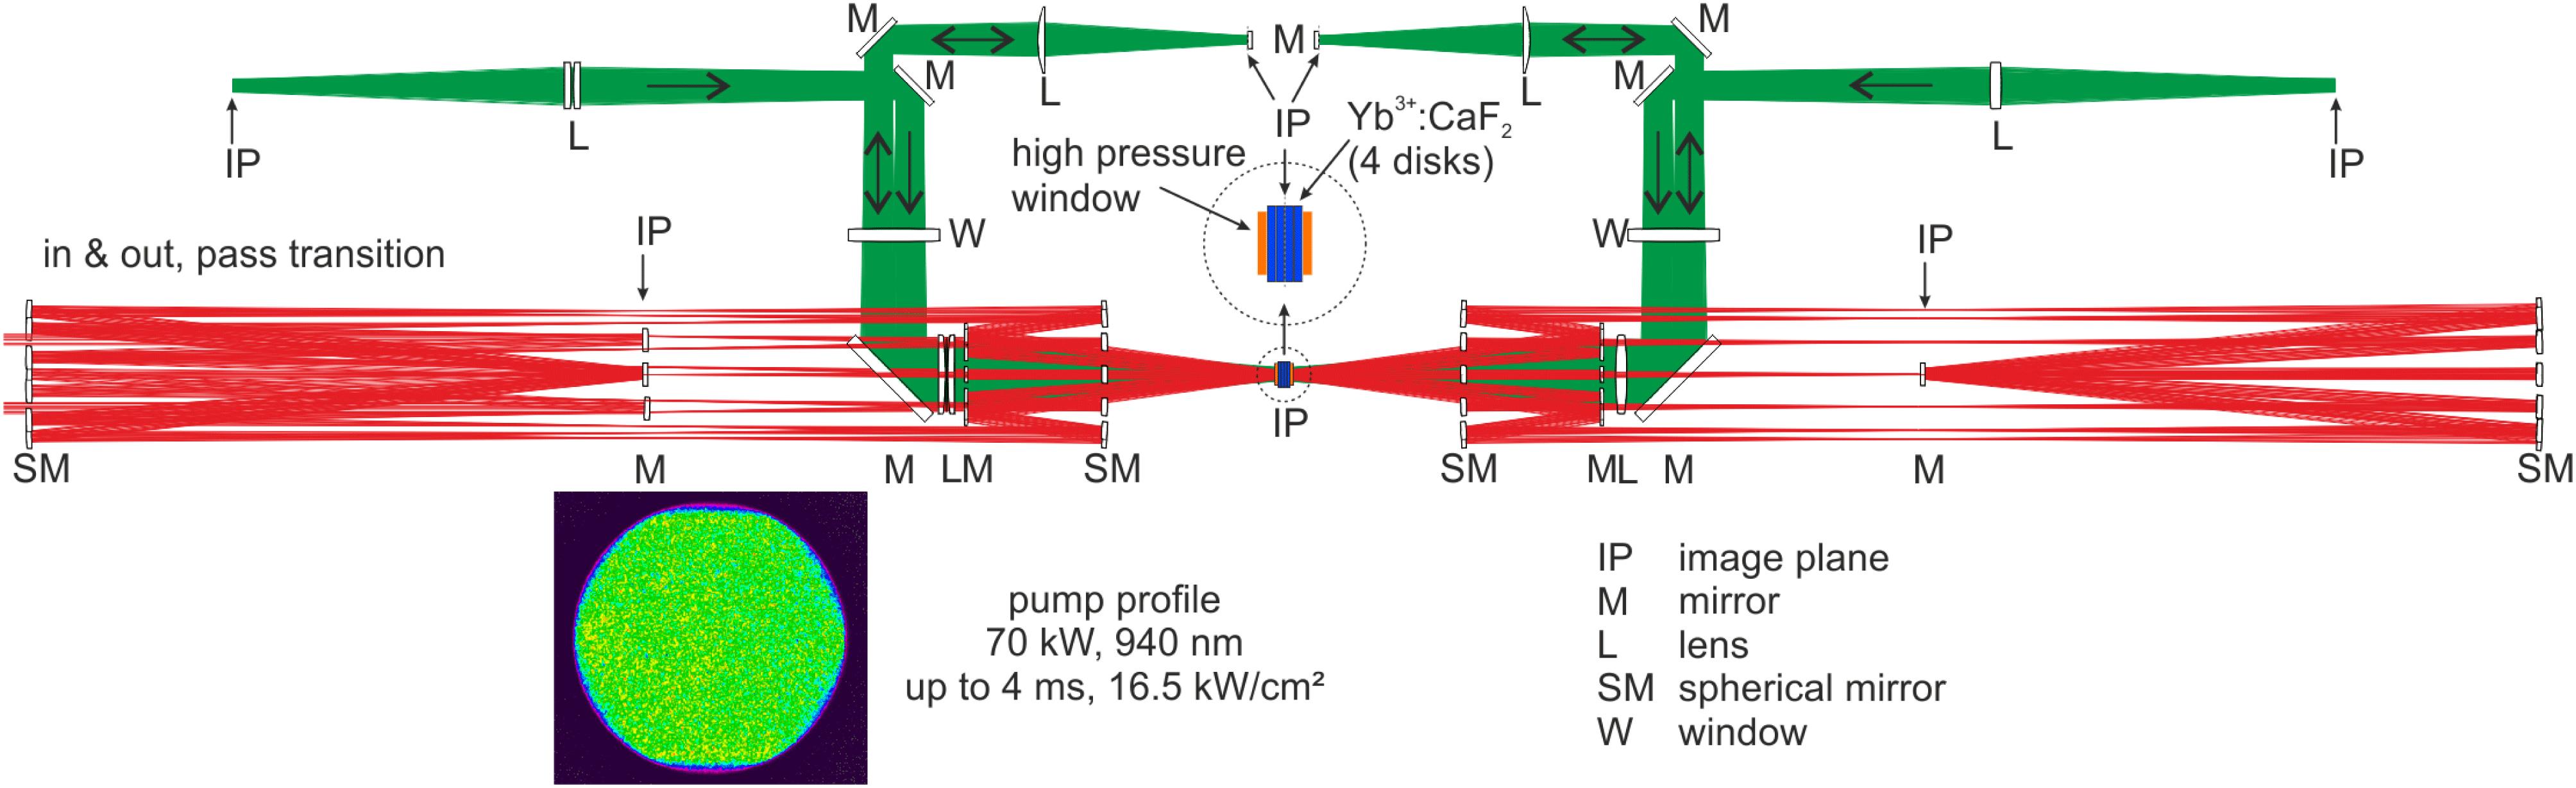 Sketch of the HEPA I amplifier setup. The laser diode pump is shown in green and the extraction passes of the laser pulse are shown in red ray traces. Two 70 kW peak power laser diode assemblies are used to pump the laser head containing four $\text{Yb}^{3+}$: $\text{CaF}_{2}$ slabs in between two high pressure windows of the cooling assembly. The pump distribution is shown in the lower left. The laser pulse passes 12 times through the amplifier head before exiting HEPA I.